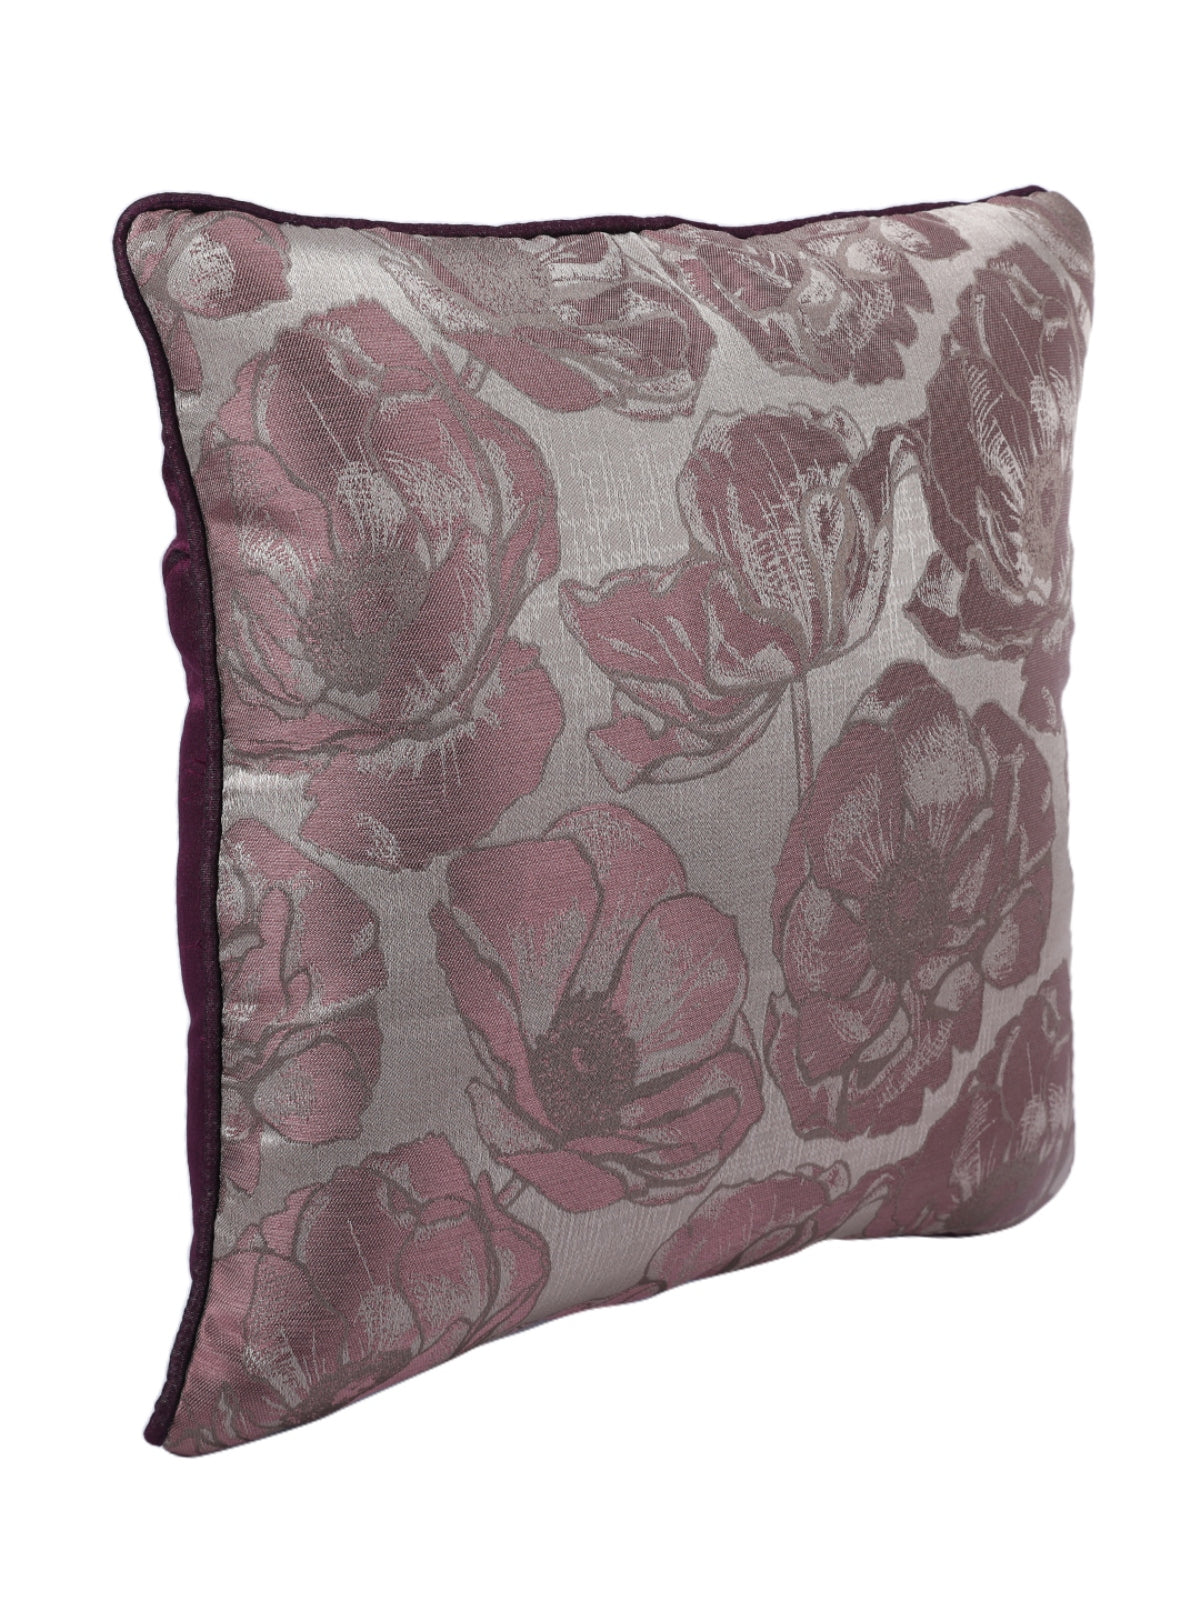 Burgundy & Silver Set of 5 Jacquard 16 Inch x 16 Inch Cushion Covers